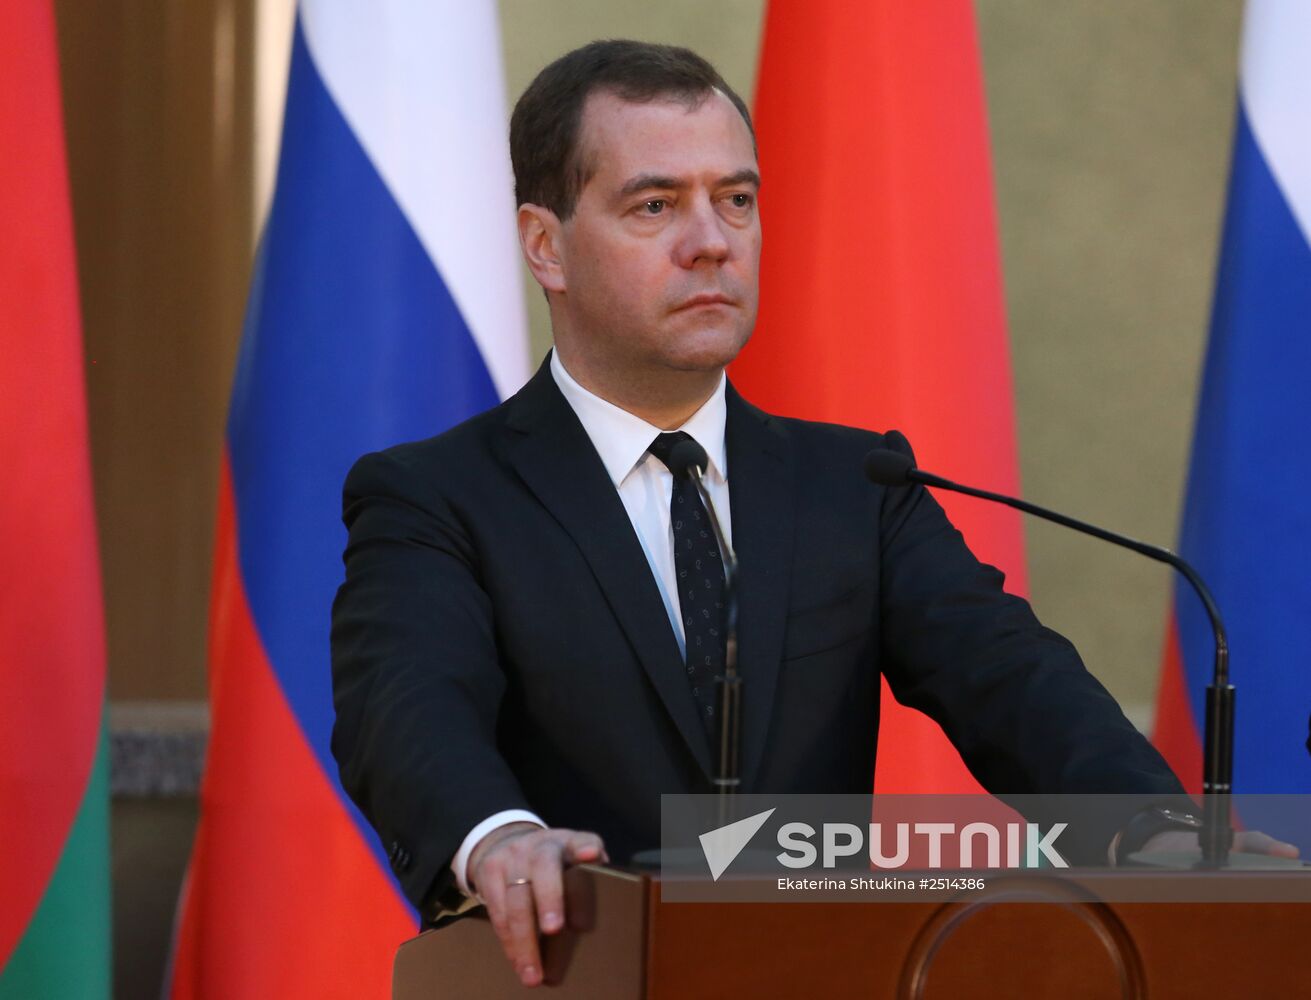 Dmitry Medvedev attends meeting of Russia-Belarus Union State Council of Ministers